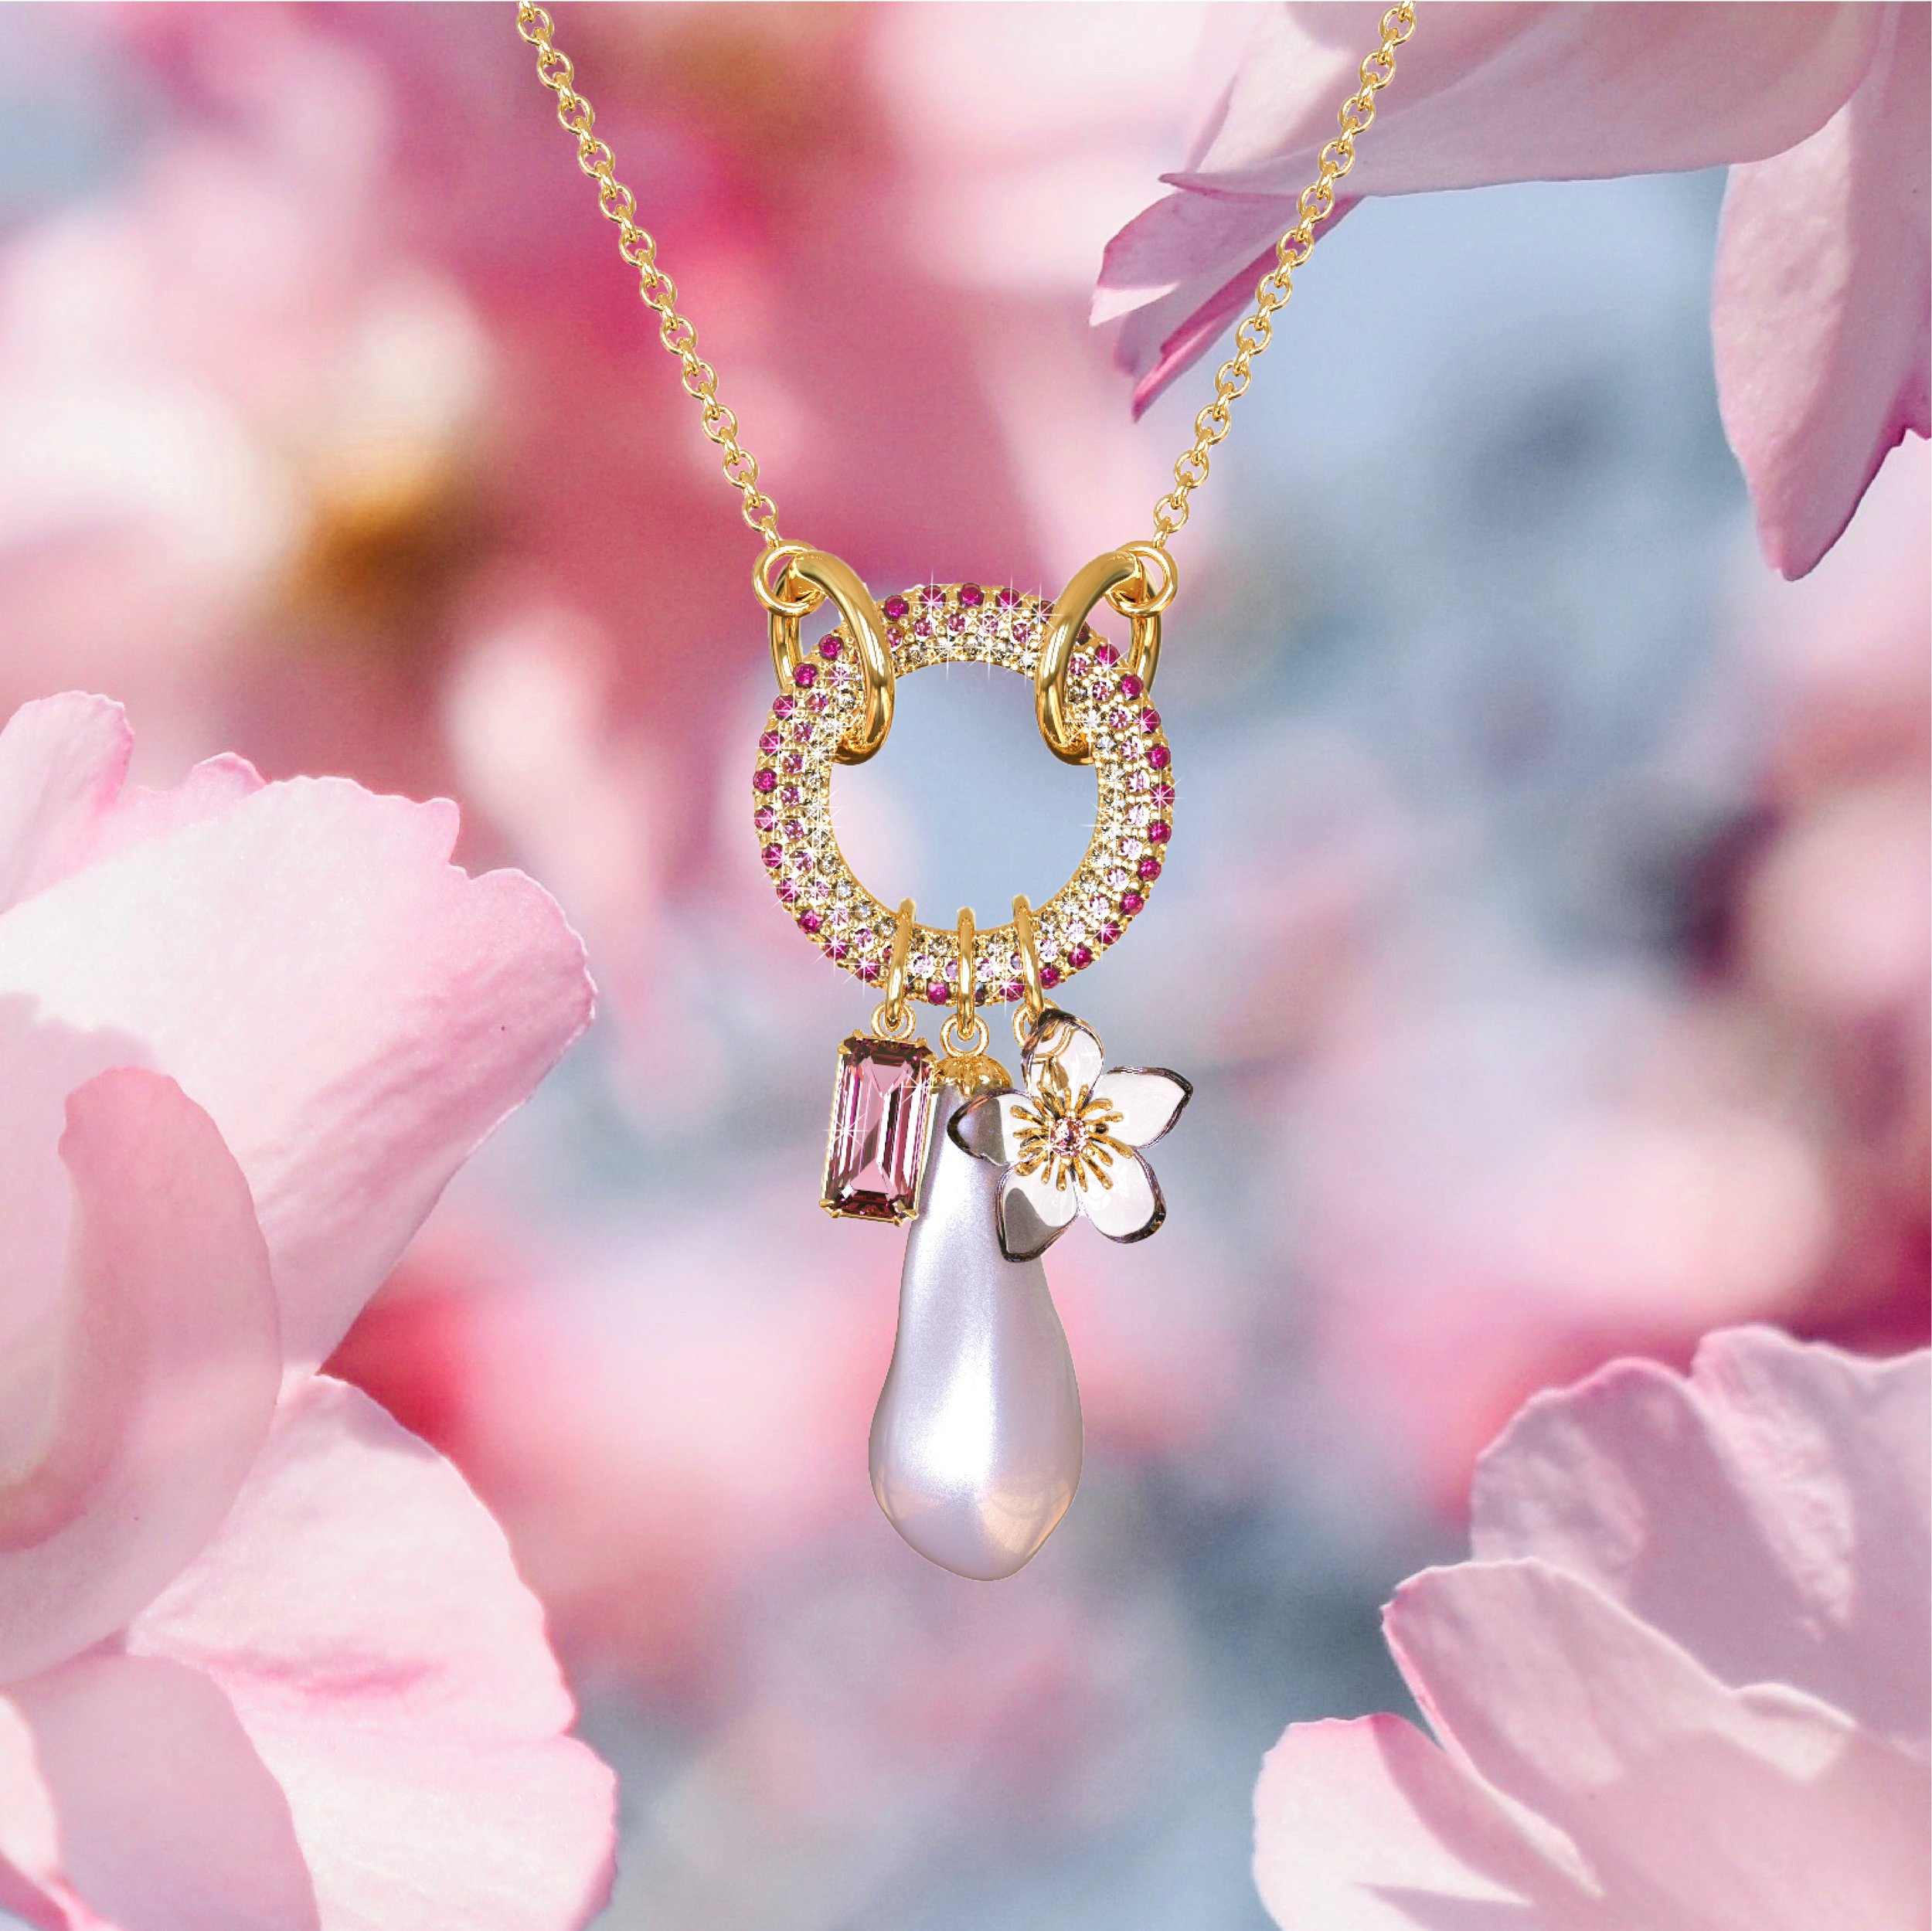 Bloom Charm Necklace 